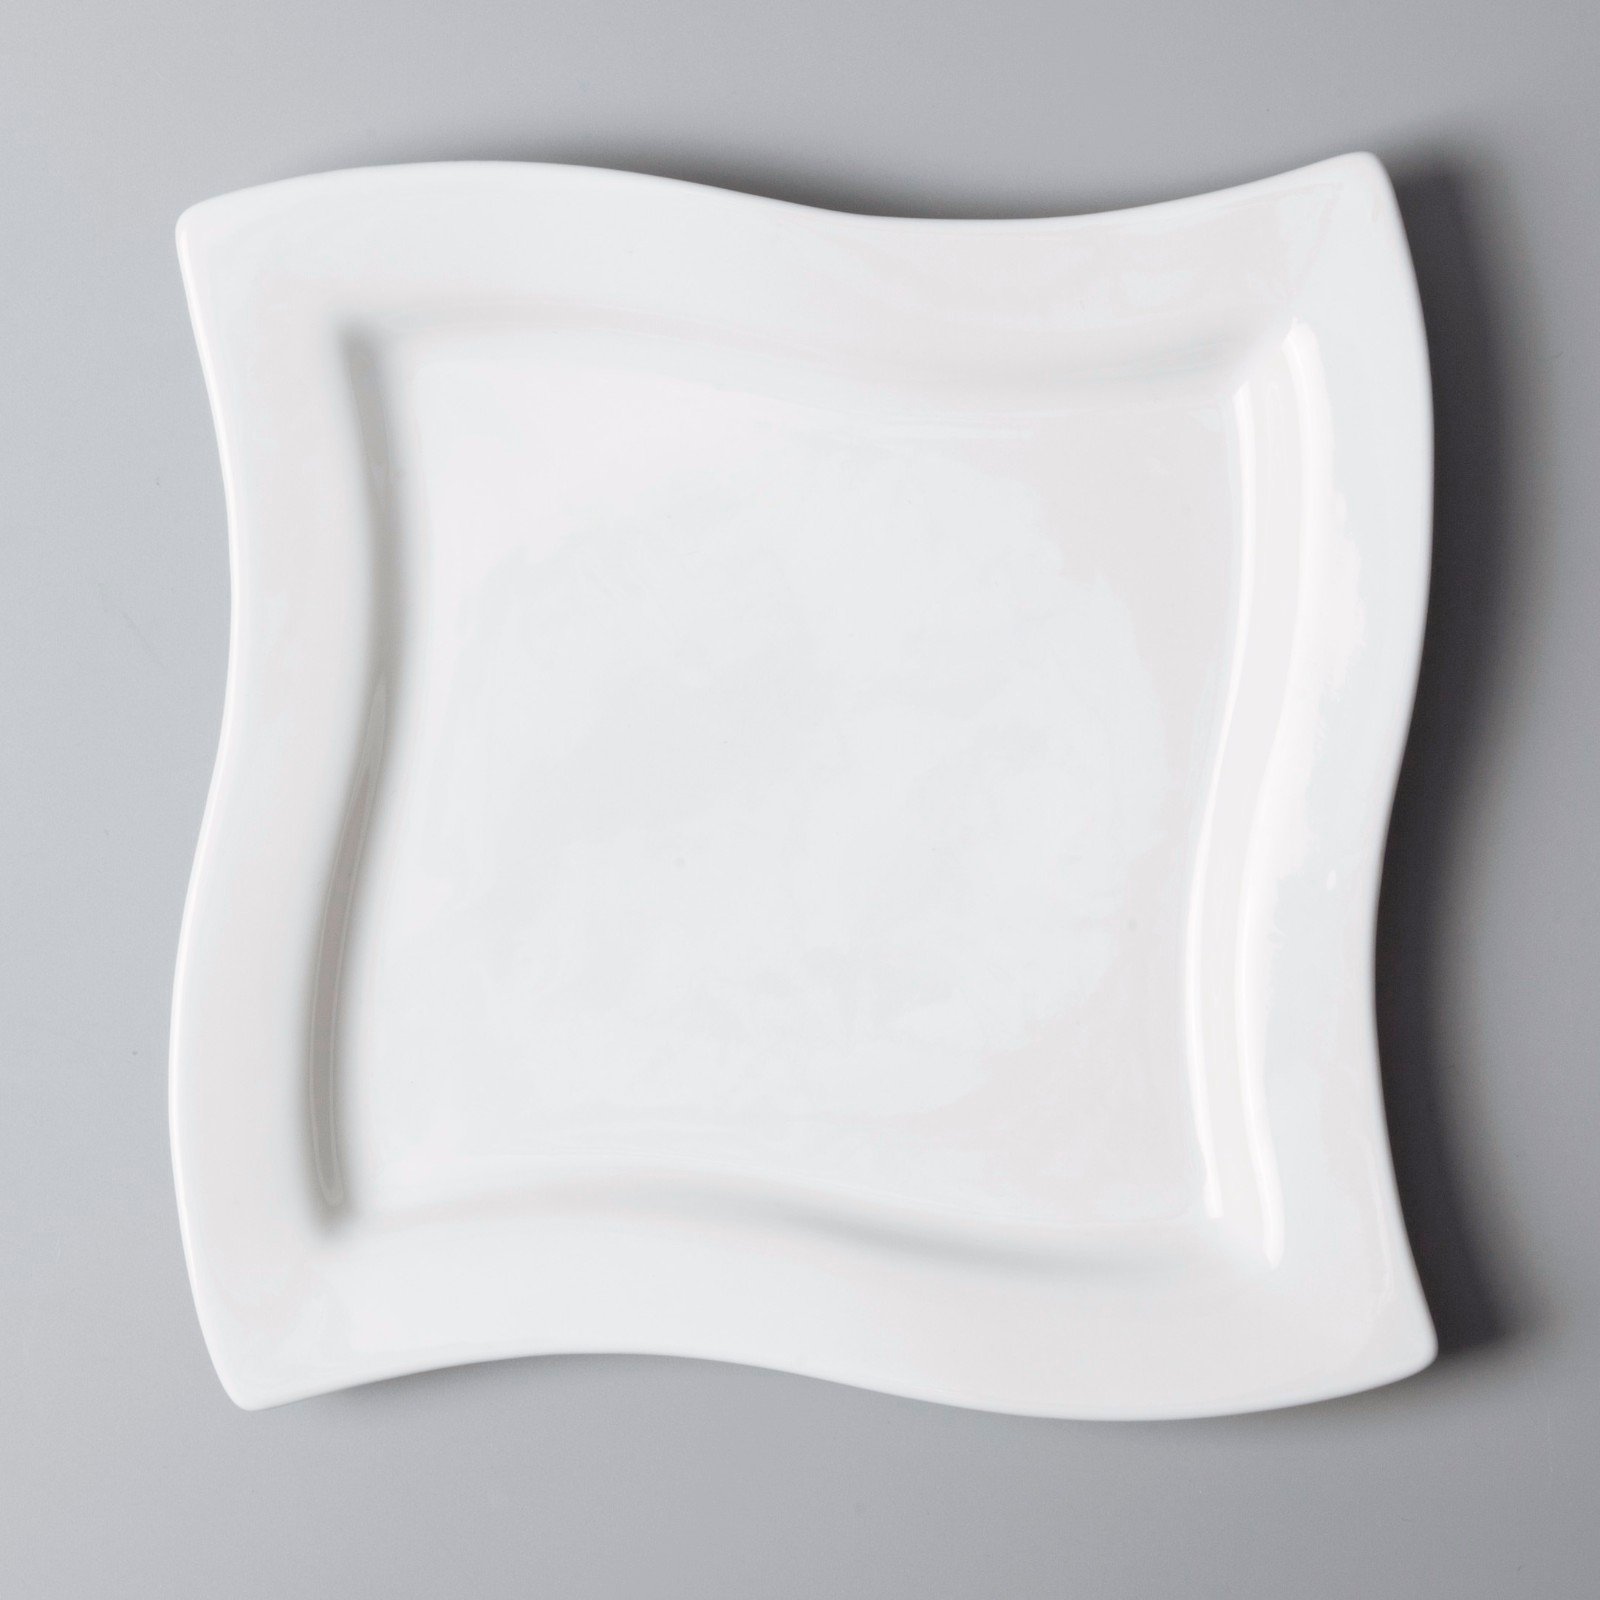 Two Eight simply white dinnerware sets for 12 rim for restaurant-4